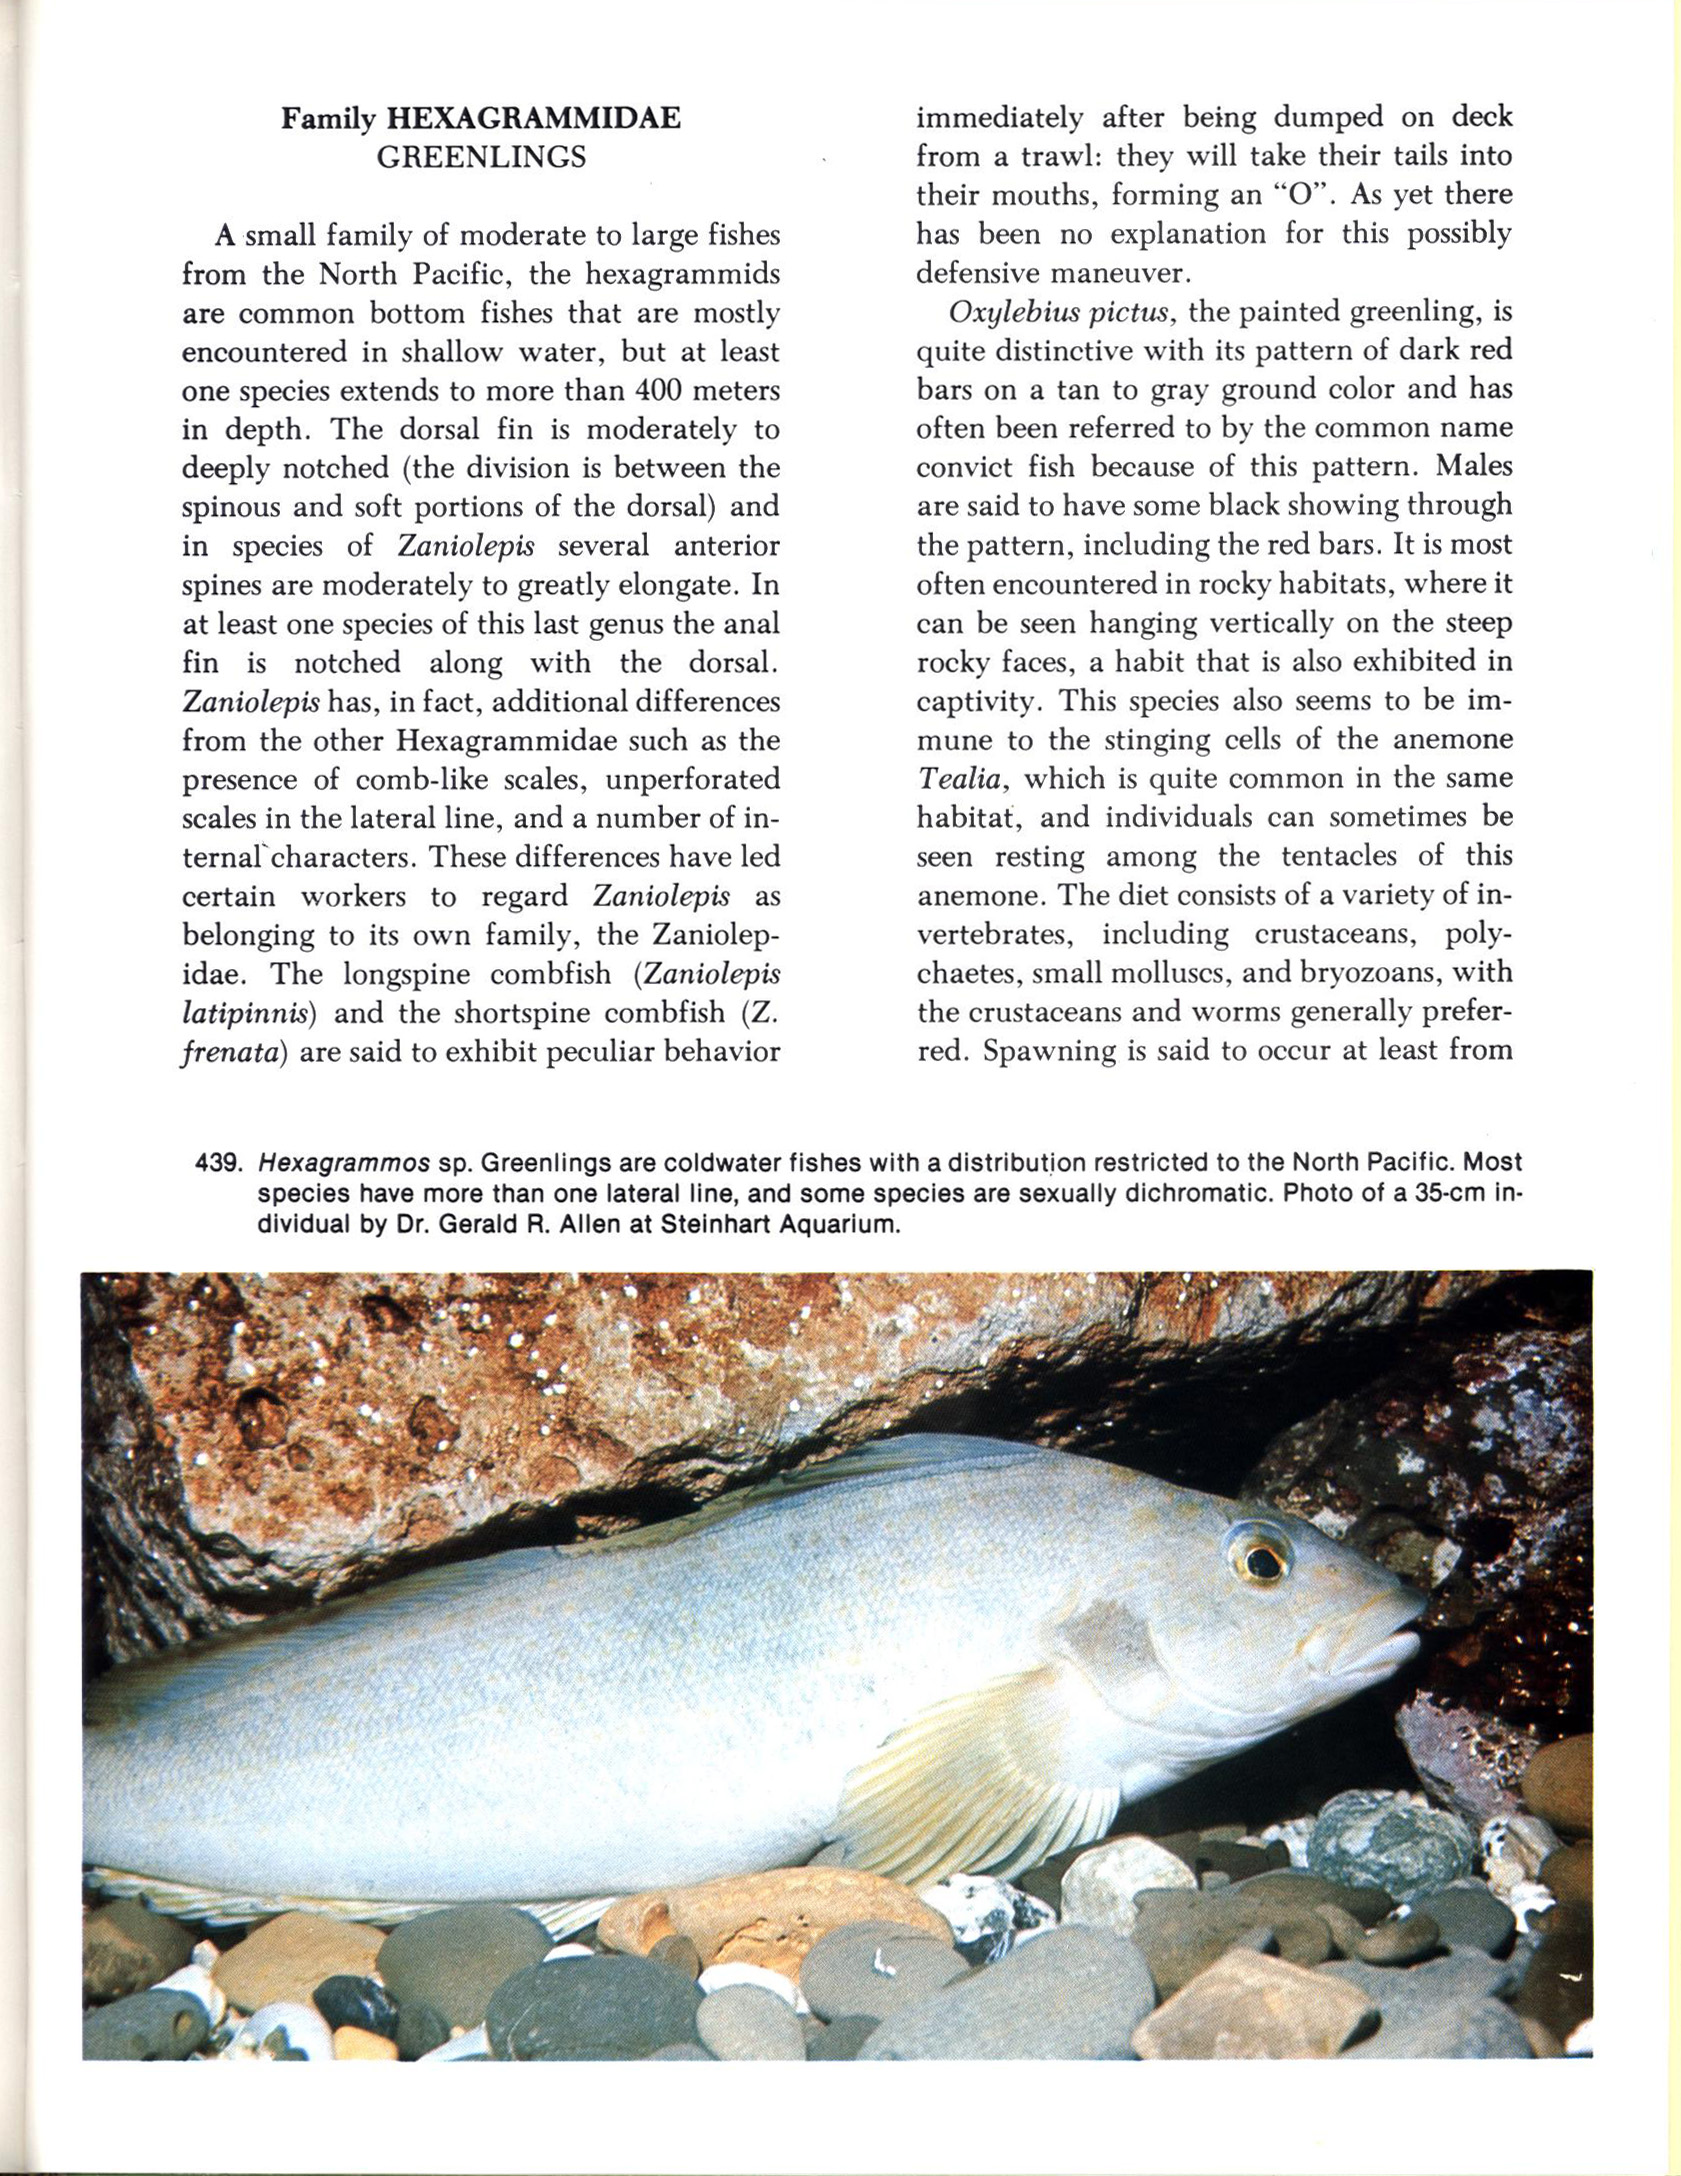 FISHES OF CALIFORNIA AND WESTERN MEXICO: Pacific marine fishes, Book 8 (California & Western Mexico). tfhp6102i